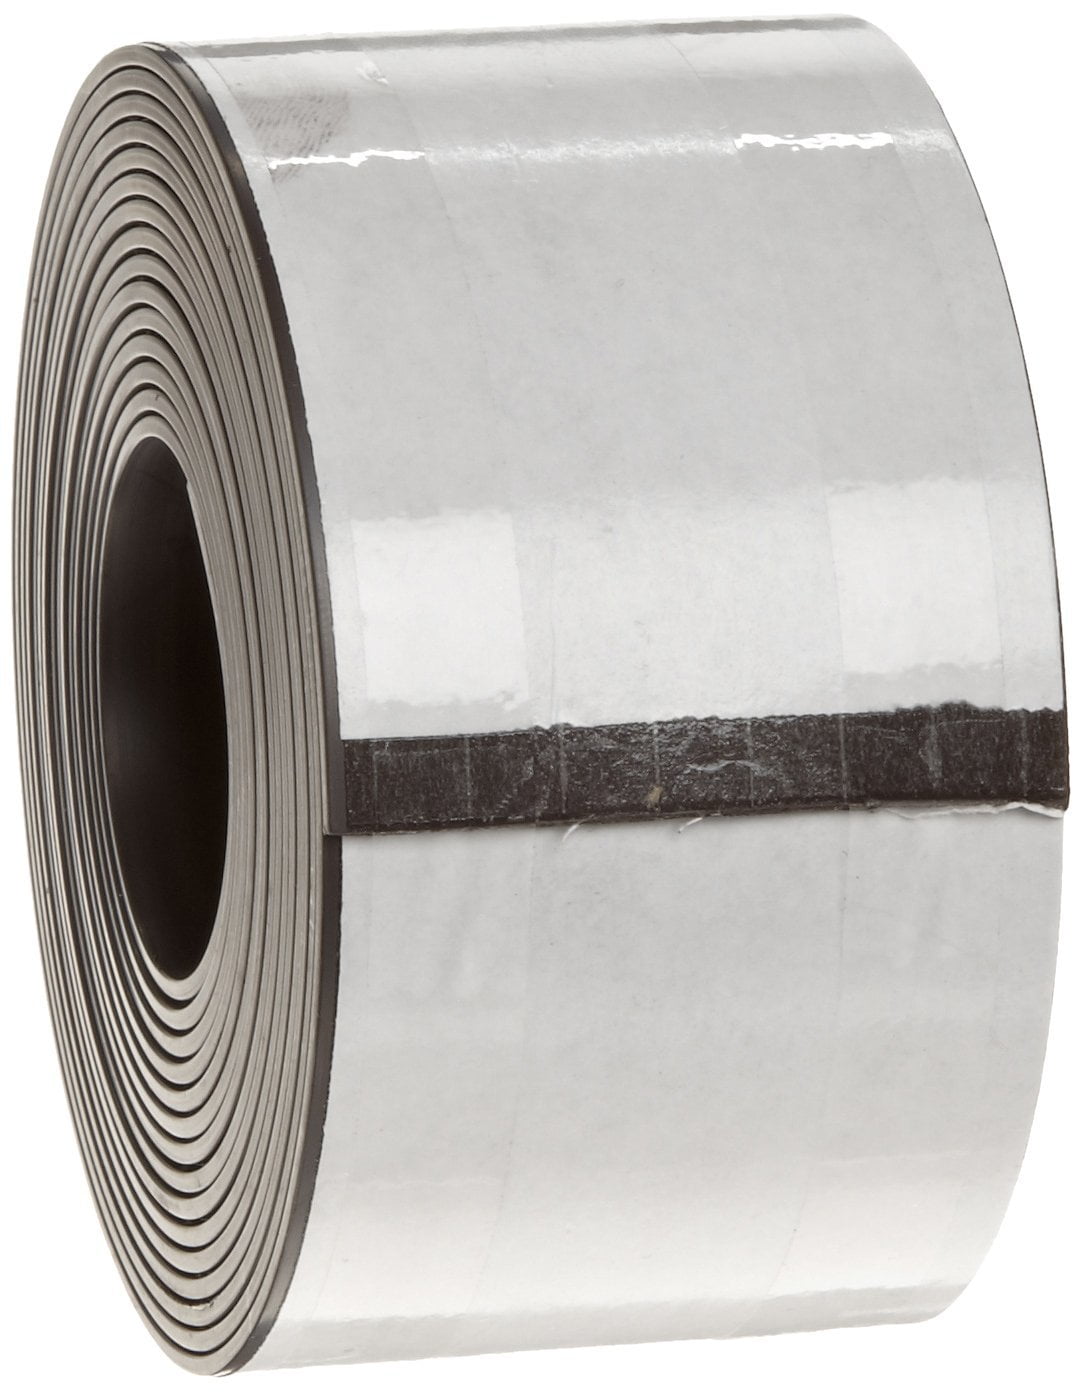 4" Long Magnetic Self Adhesive Tape Roll & Strips 10x10cm 2cm wide 3mm Thick 